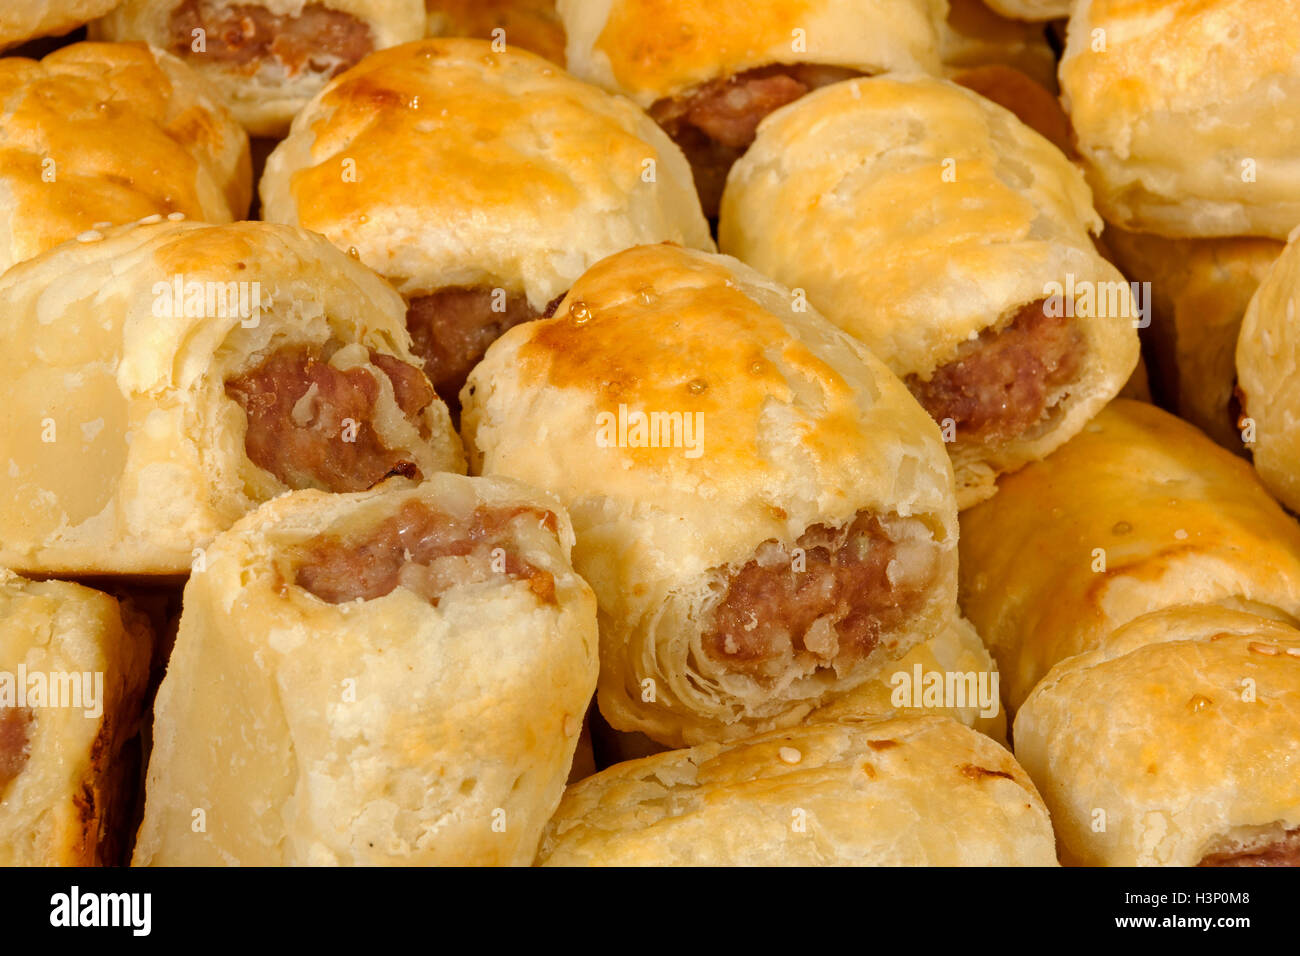 extreme close up freshly baked homemade cocktail sausage rolls Stock Photo